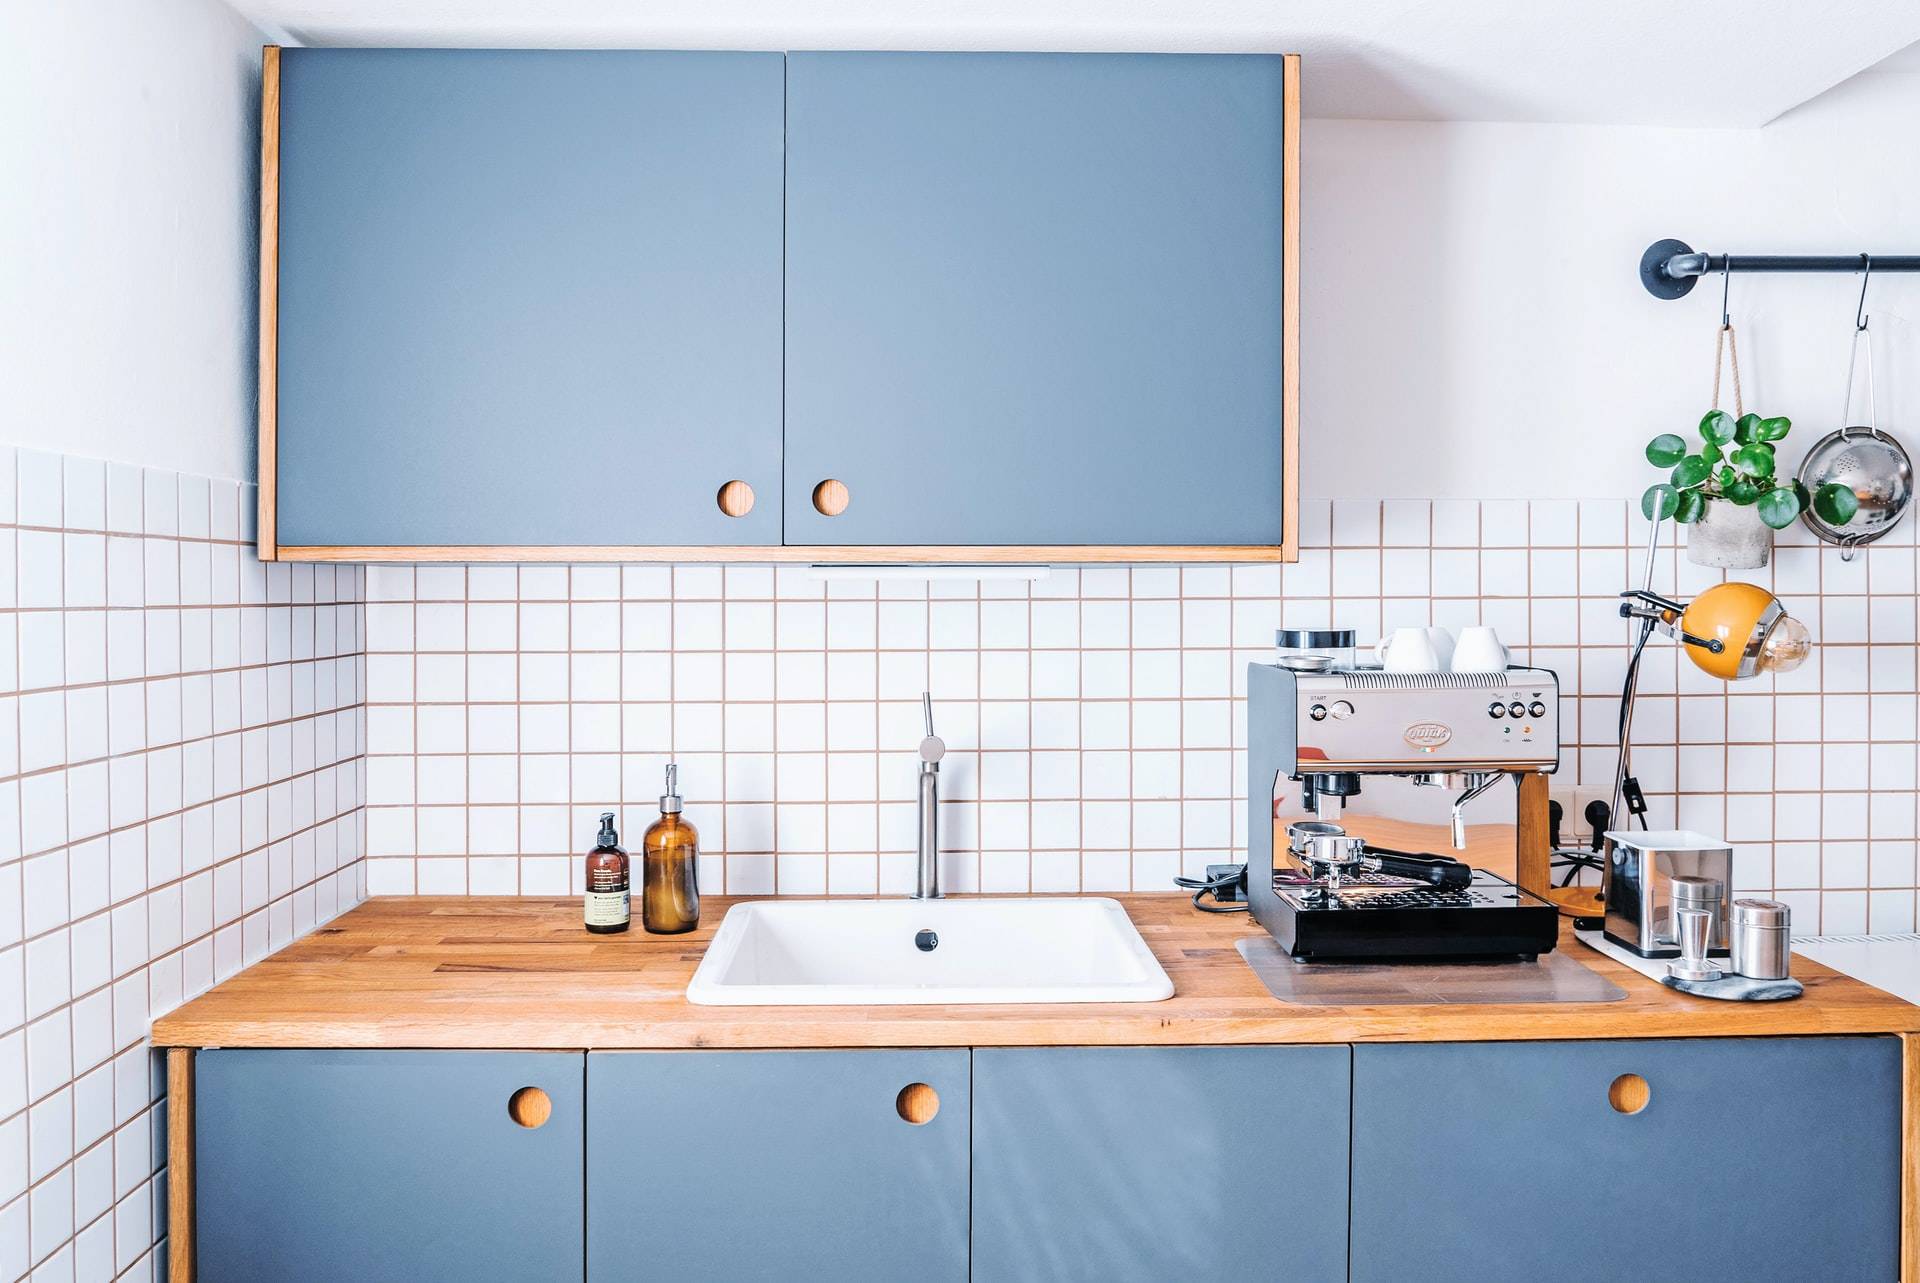 A kitchenette includes only a few essential appliances such as this coffee machine (from Unsplash)